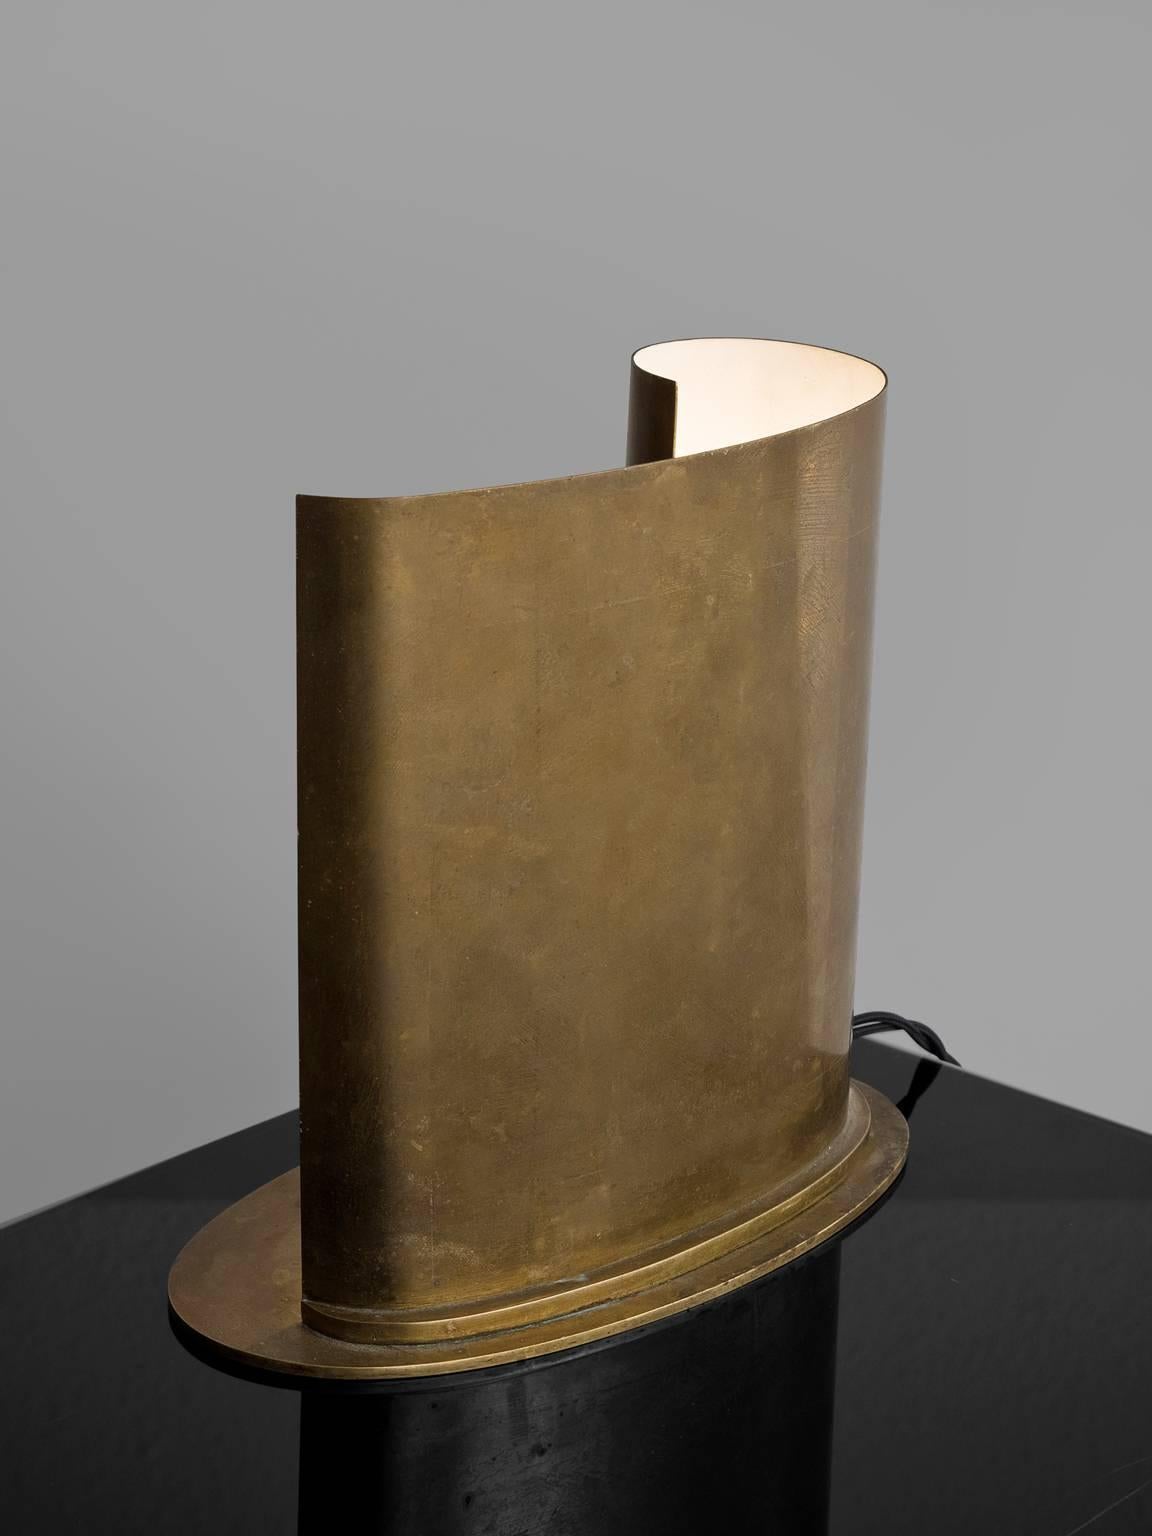 Table lamp, brass, Italy, 1940s.

This little elegant Italian table light is made by means of a curved brass slat and an oval base. The craftsmanship is truly exquisite. The curve is a wonderfully warm patinated white. The lamp, even when switched